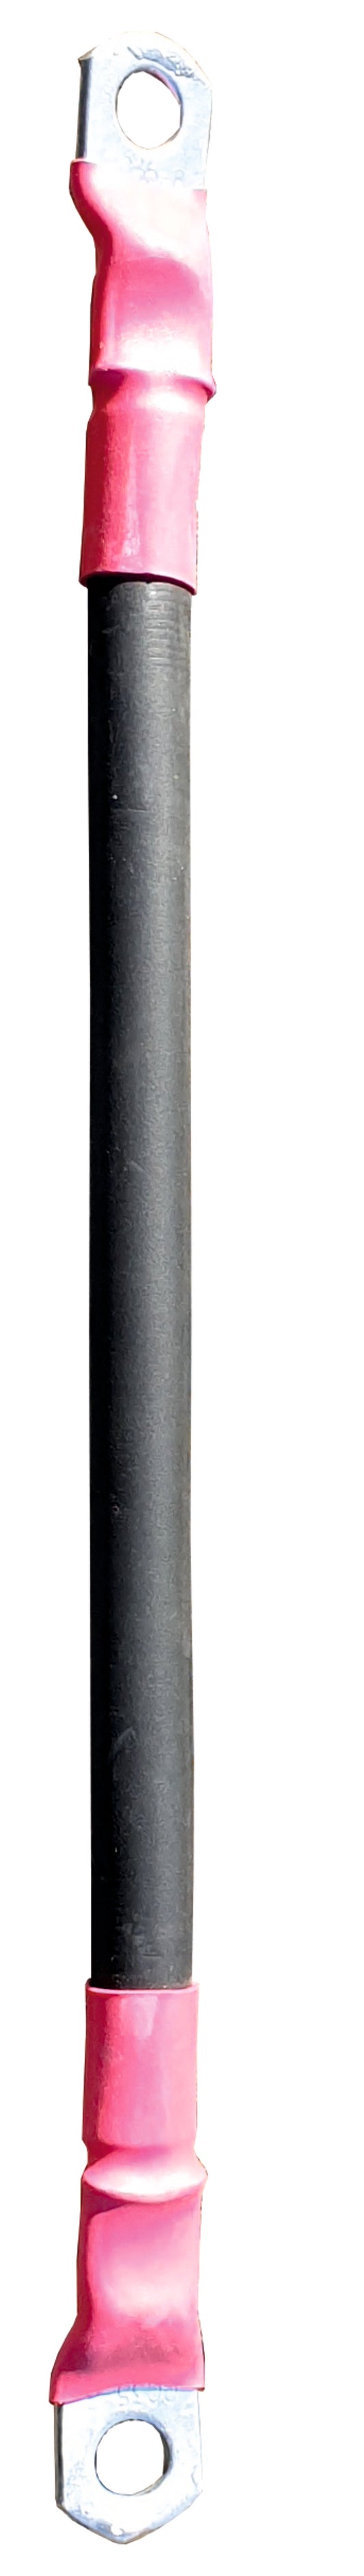 Battery cable 40 cm long